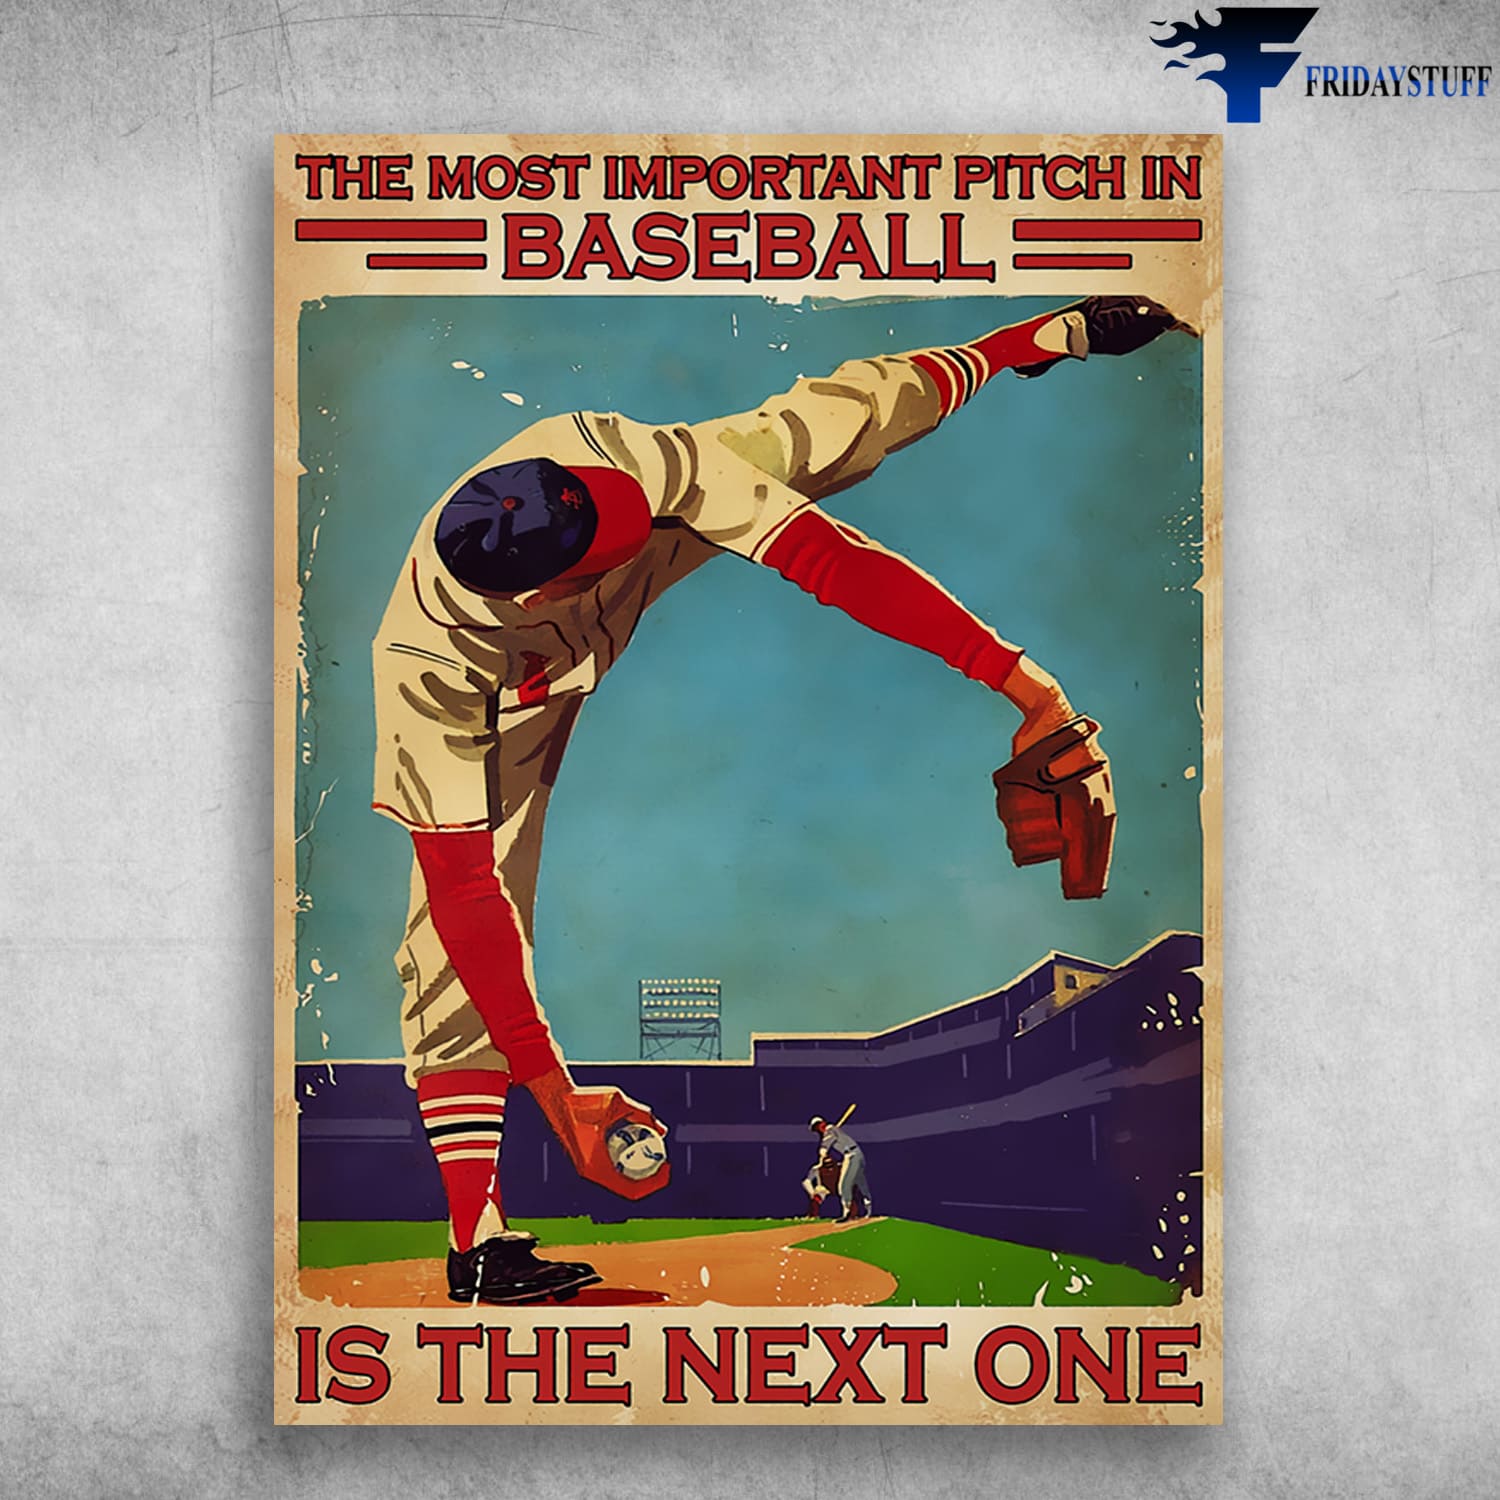 Baseball Player, Baseball Poster, The Most Important Pitch In Baseball, Is The Next One